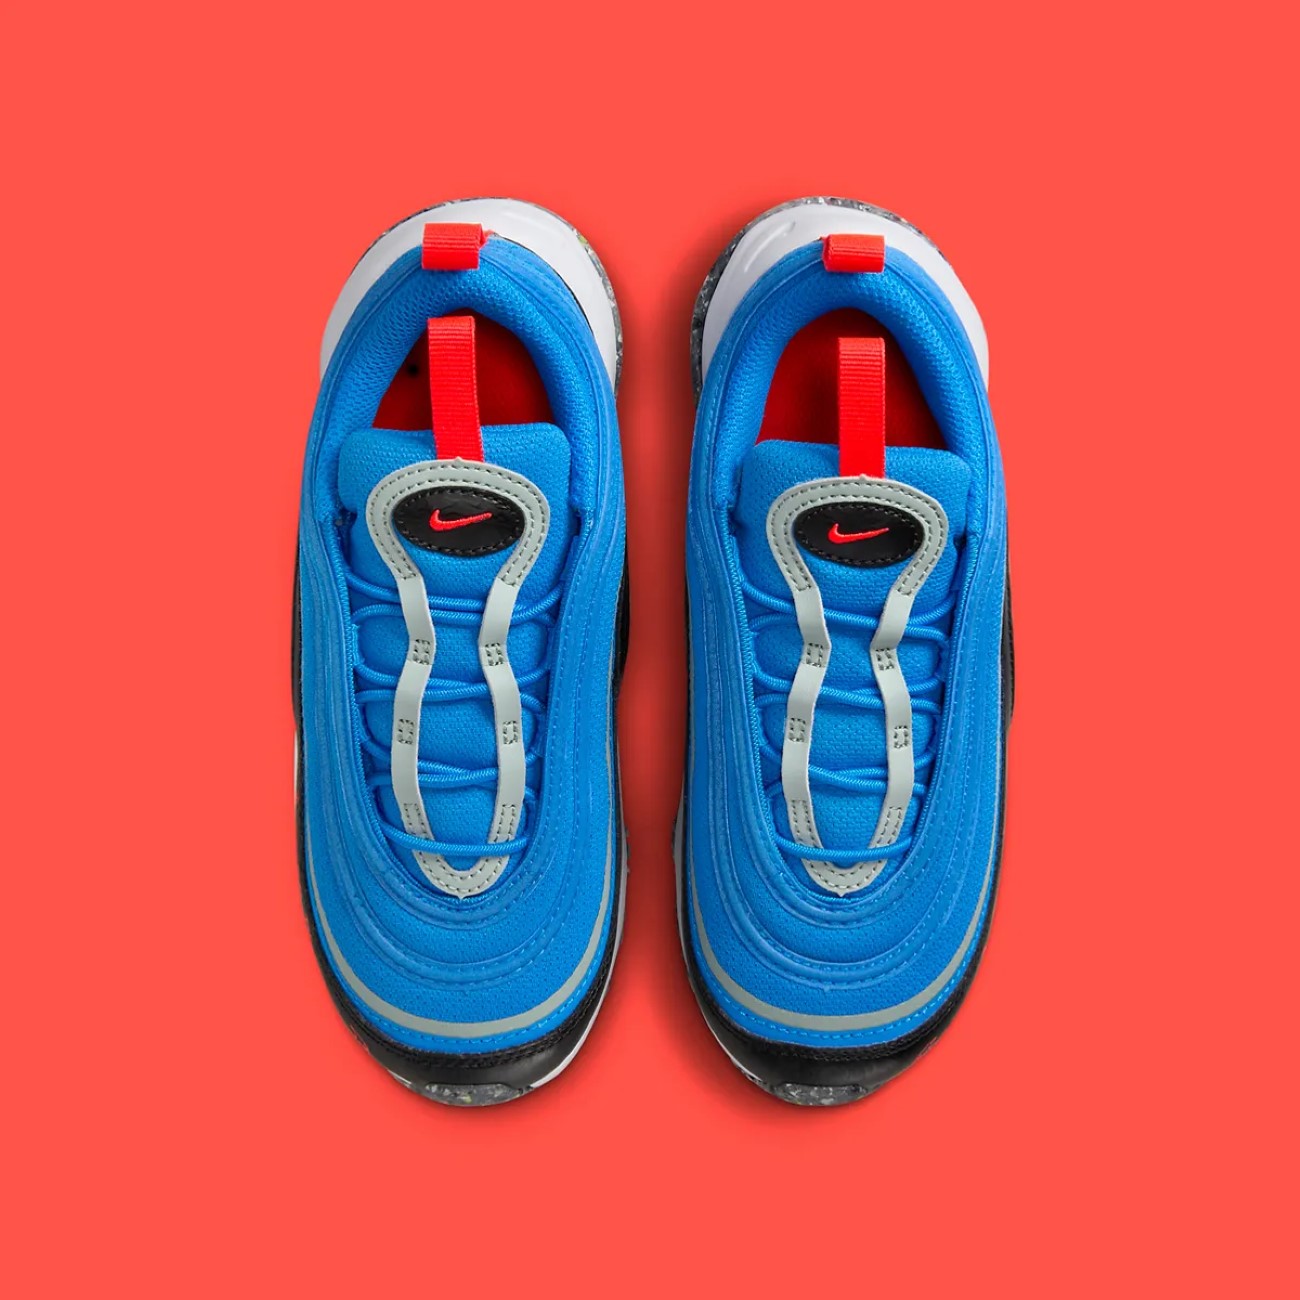 Nike Air Max 97 "Just Do It" embraces playfulness